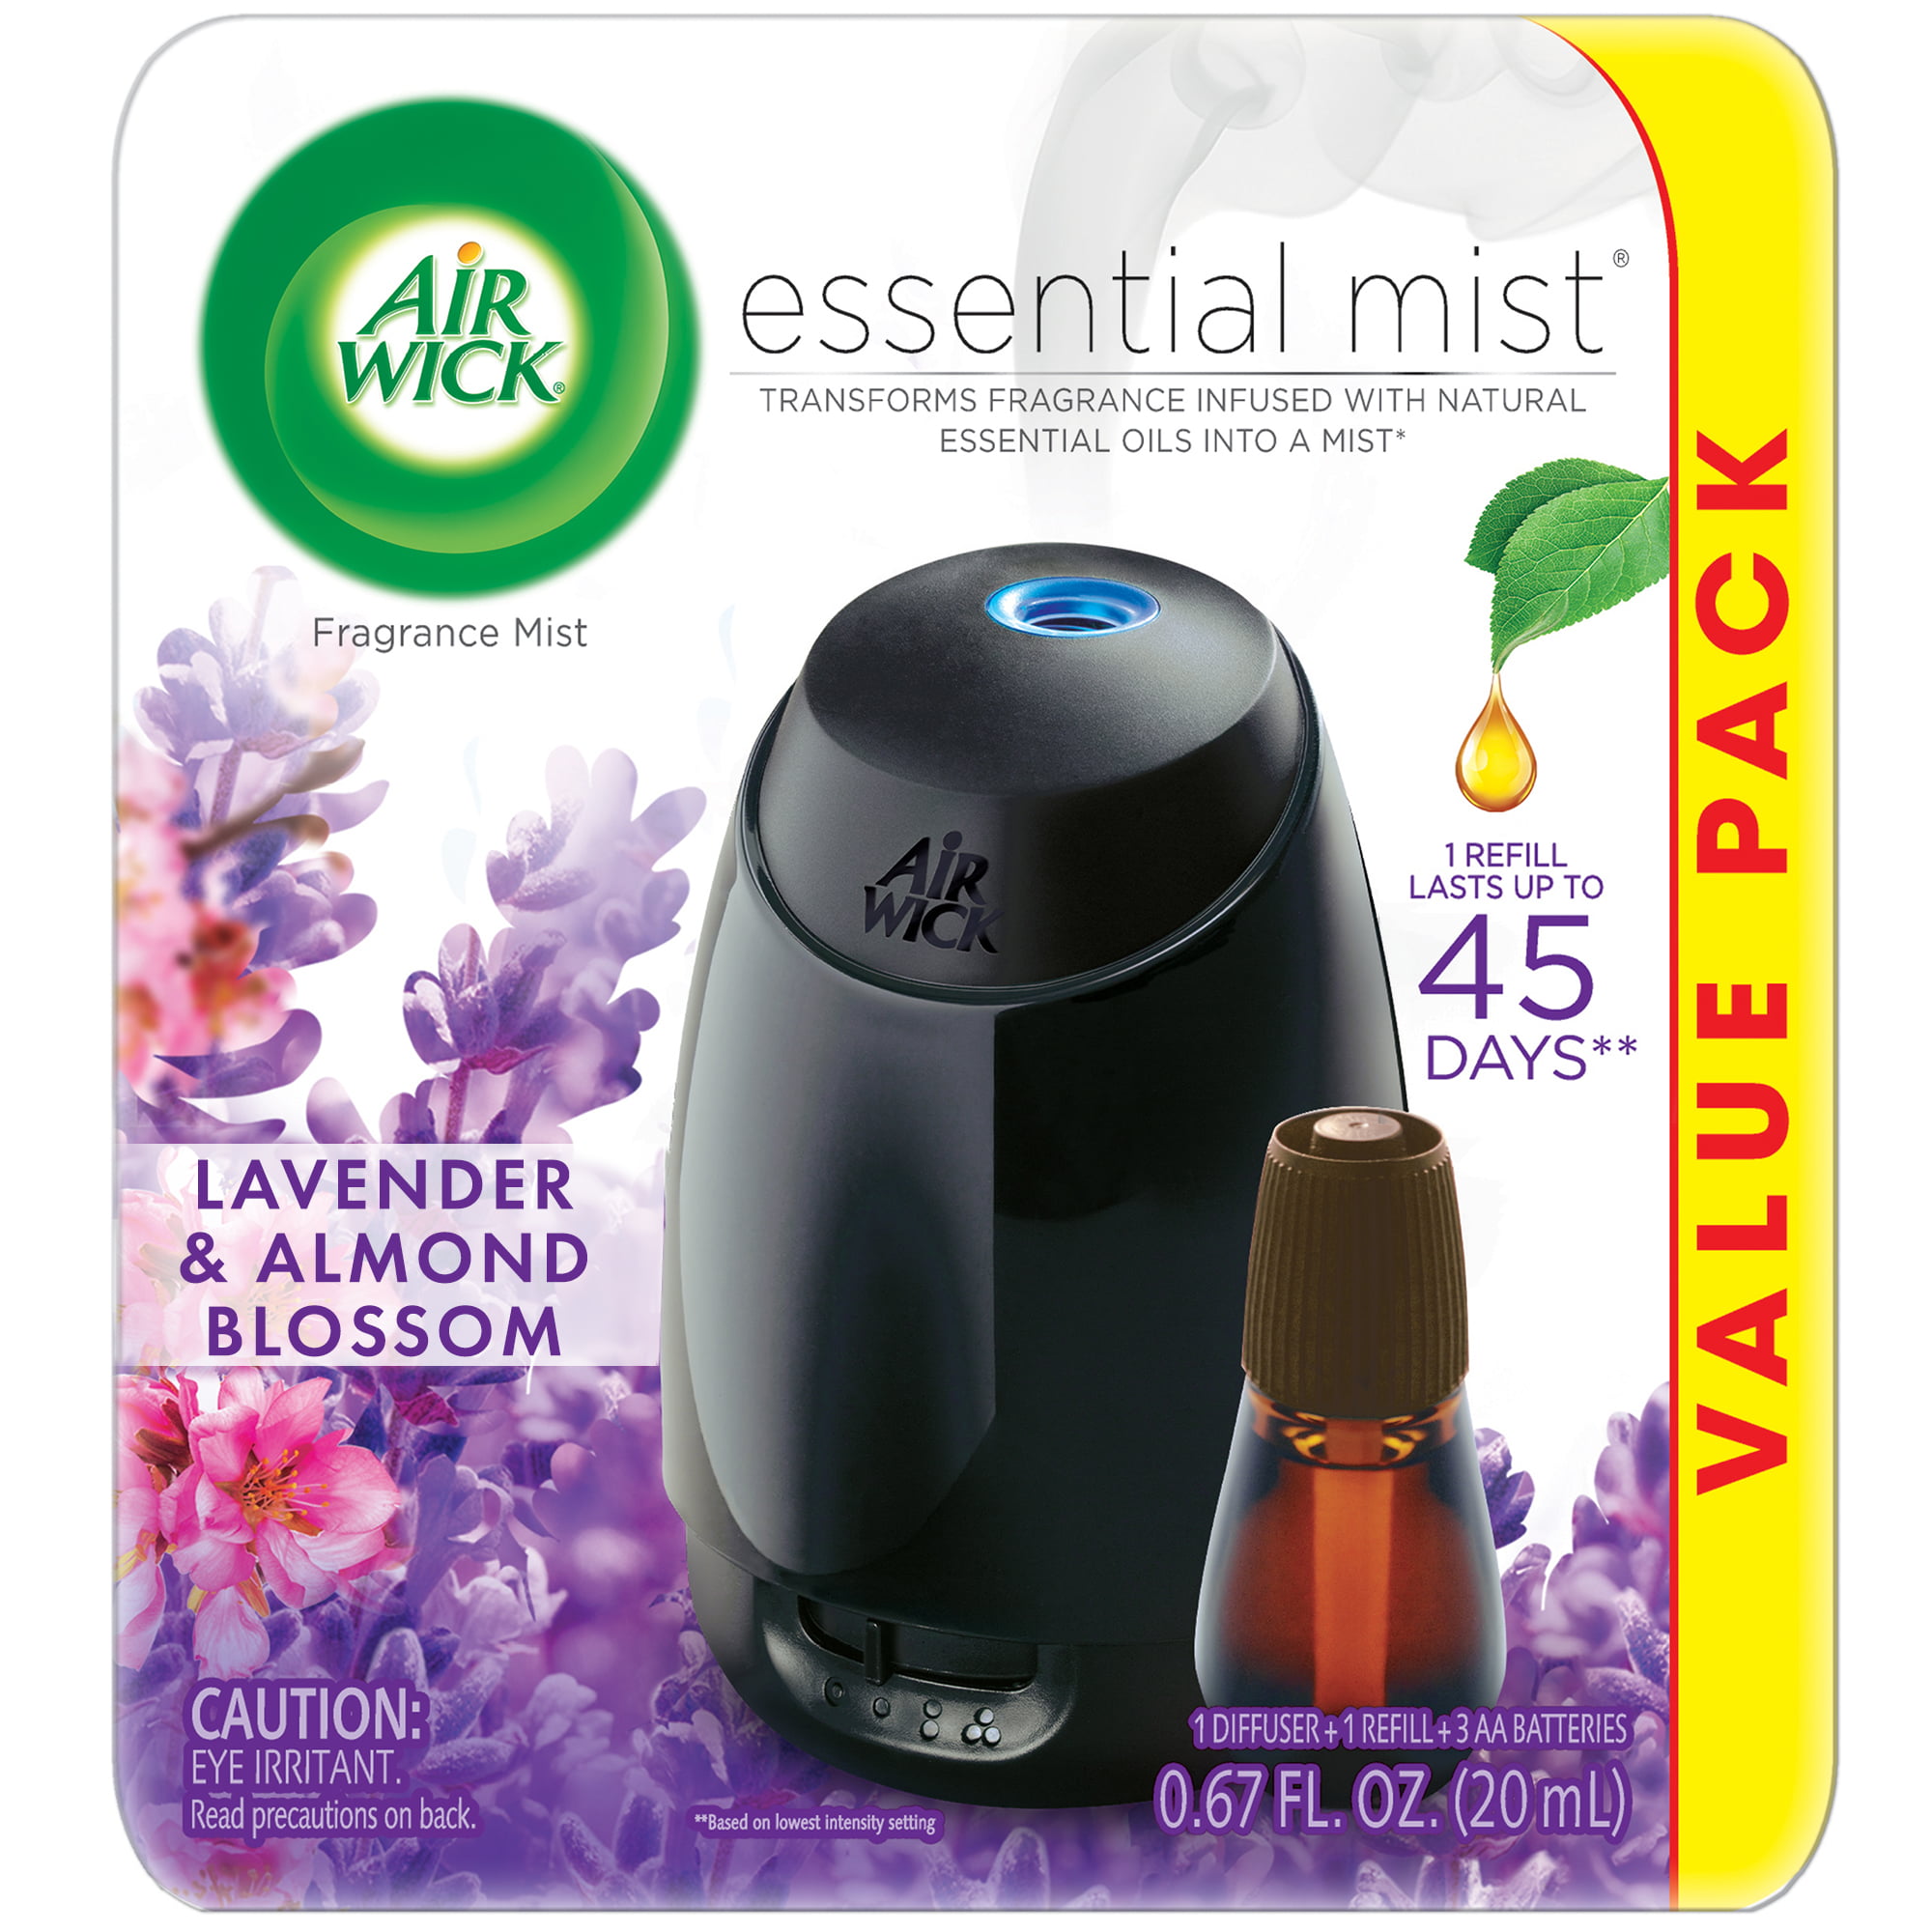 Air Wick Essential Mist Starter Kit (Diffuser + Refill), Lavender and